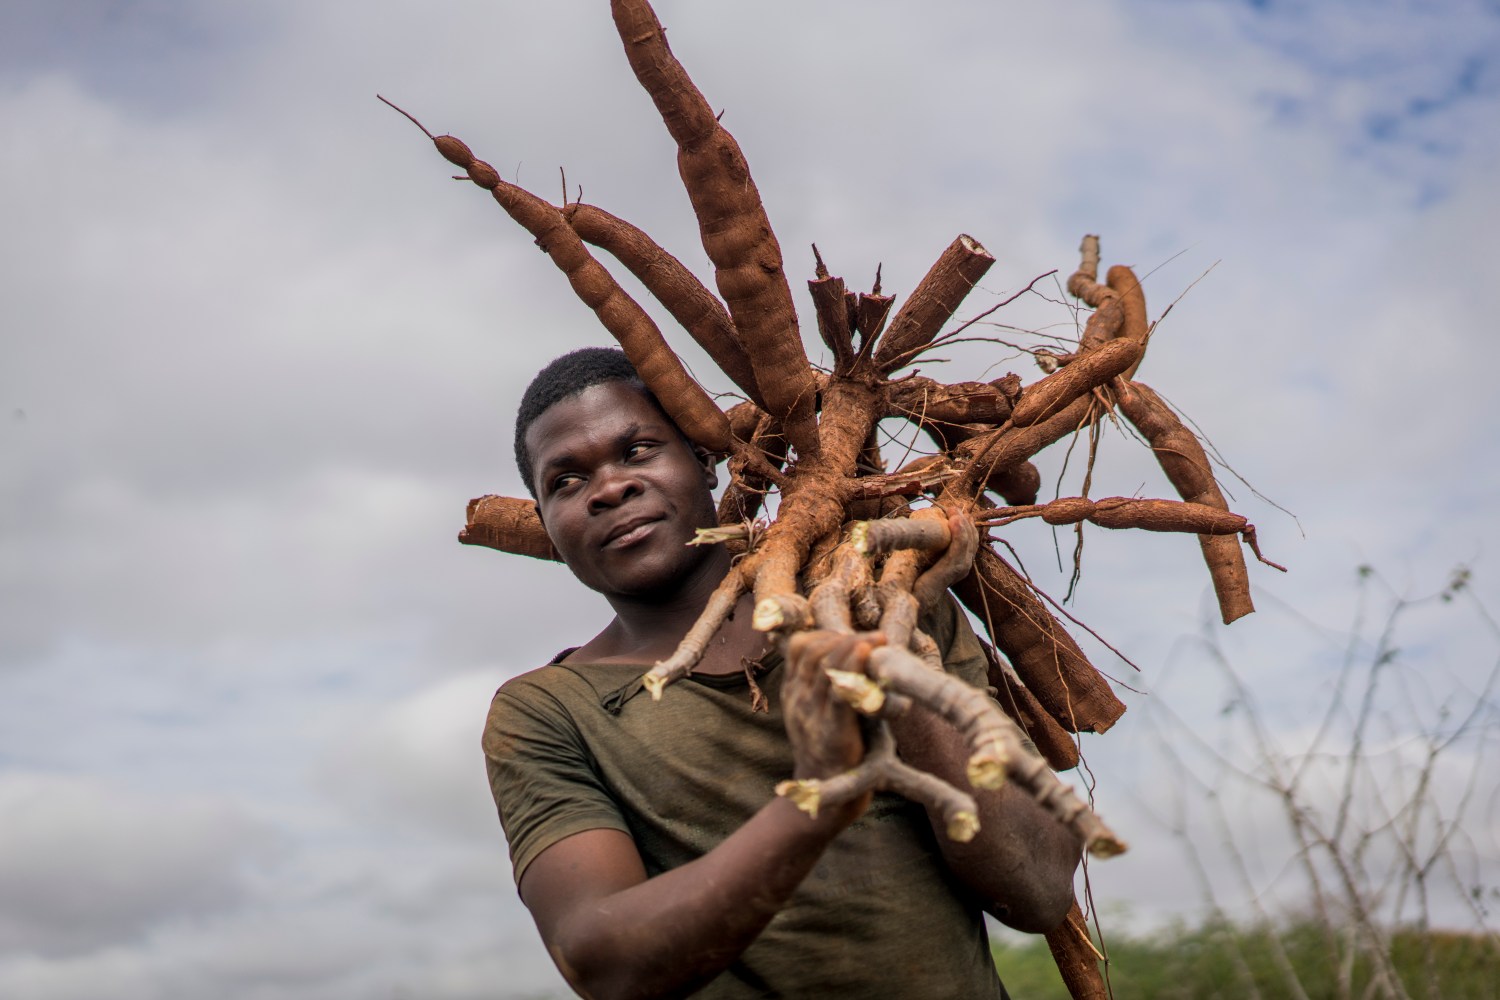 A worker carries cassava roots after they were pulled from the ground during a harvest at the farm of Aolil Pedro in Murrupula Mozambique on August 9th 2016. Pedro took part in an AGRA cassava farmers program that allowed him to gain access to a small amount of land and new varieties of cassava that are resistant to disease that plagues older forms of cassava that are traditionally grown in Mozambique. The AGRA program helped to develop 11 new varieties of cassava that are now being used around the country. The program also connected farmers with resources to find places to sell their cassava.